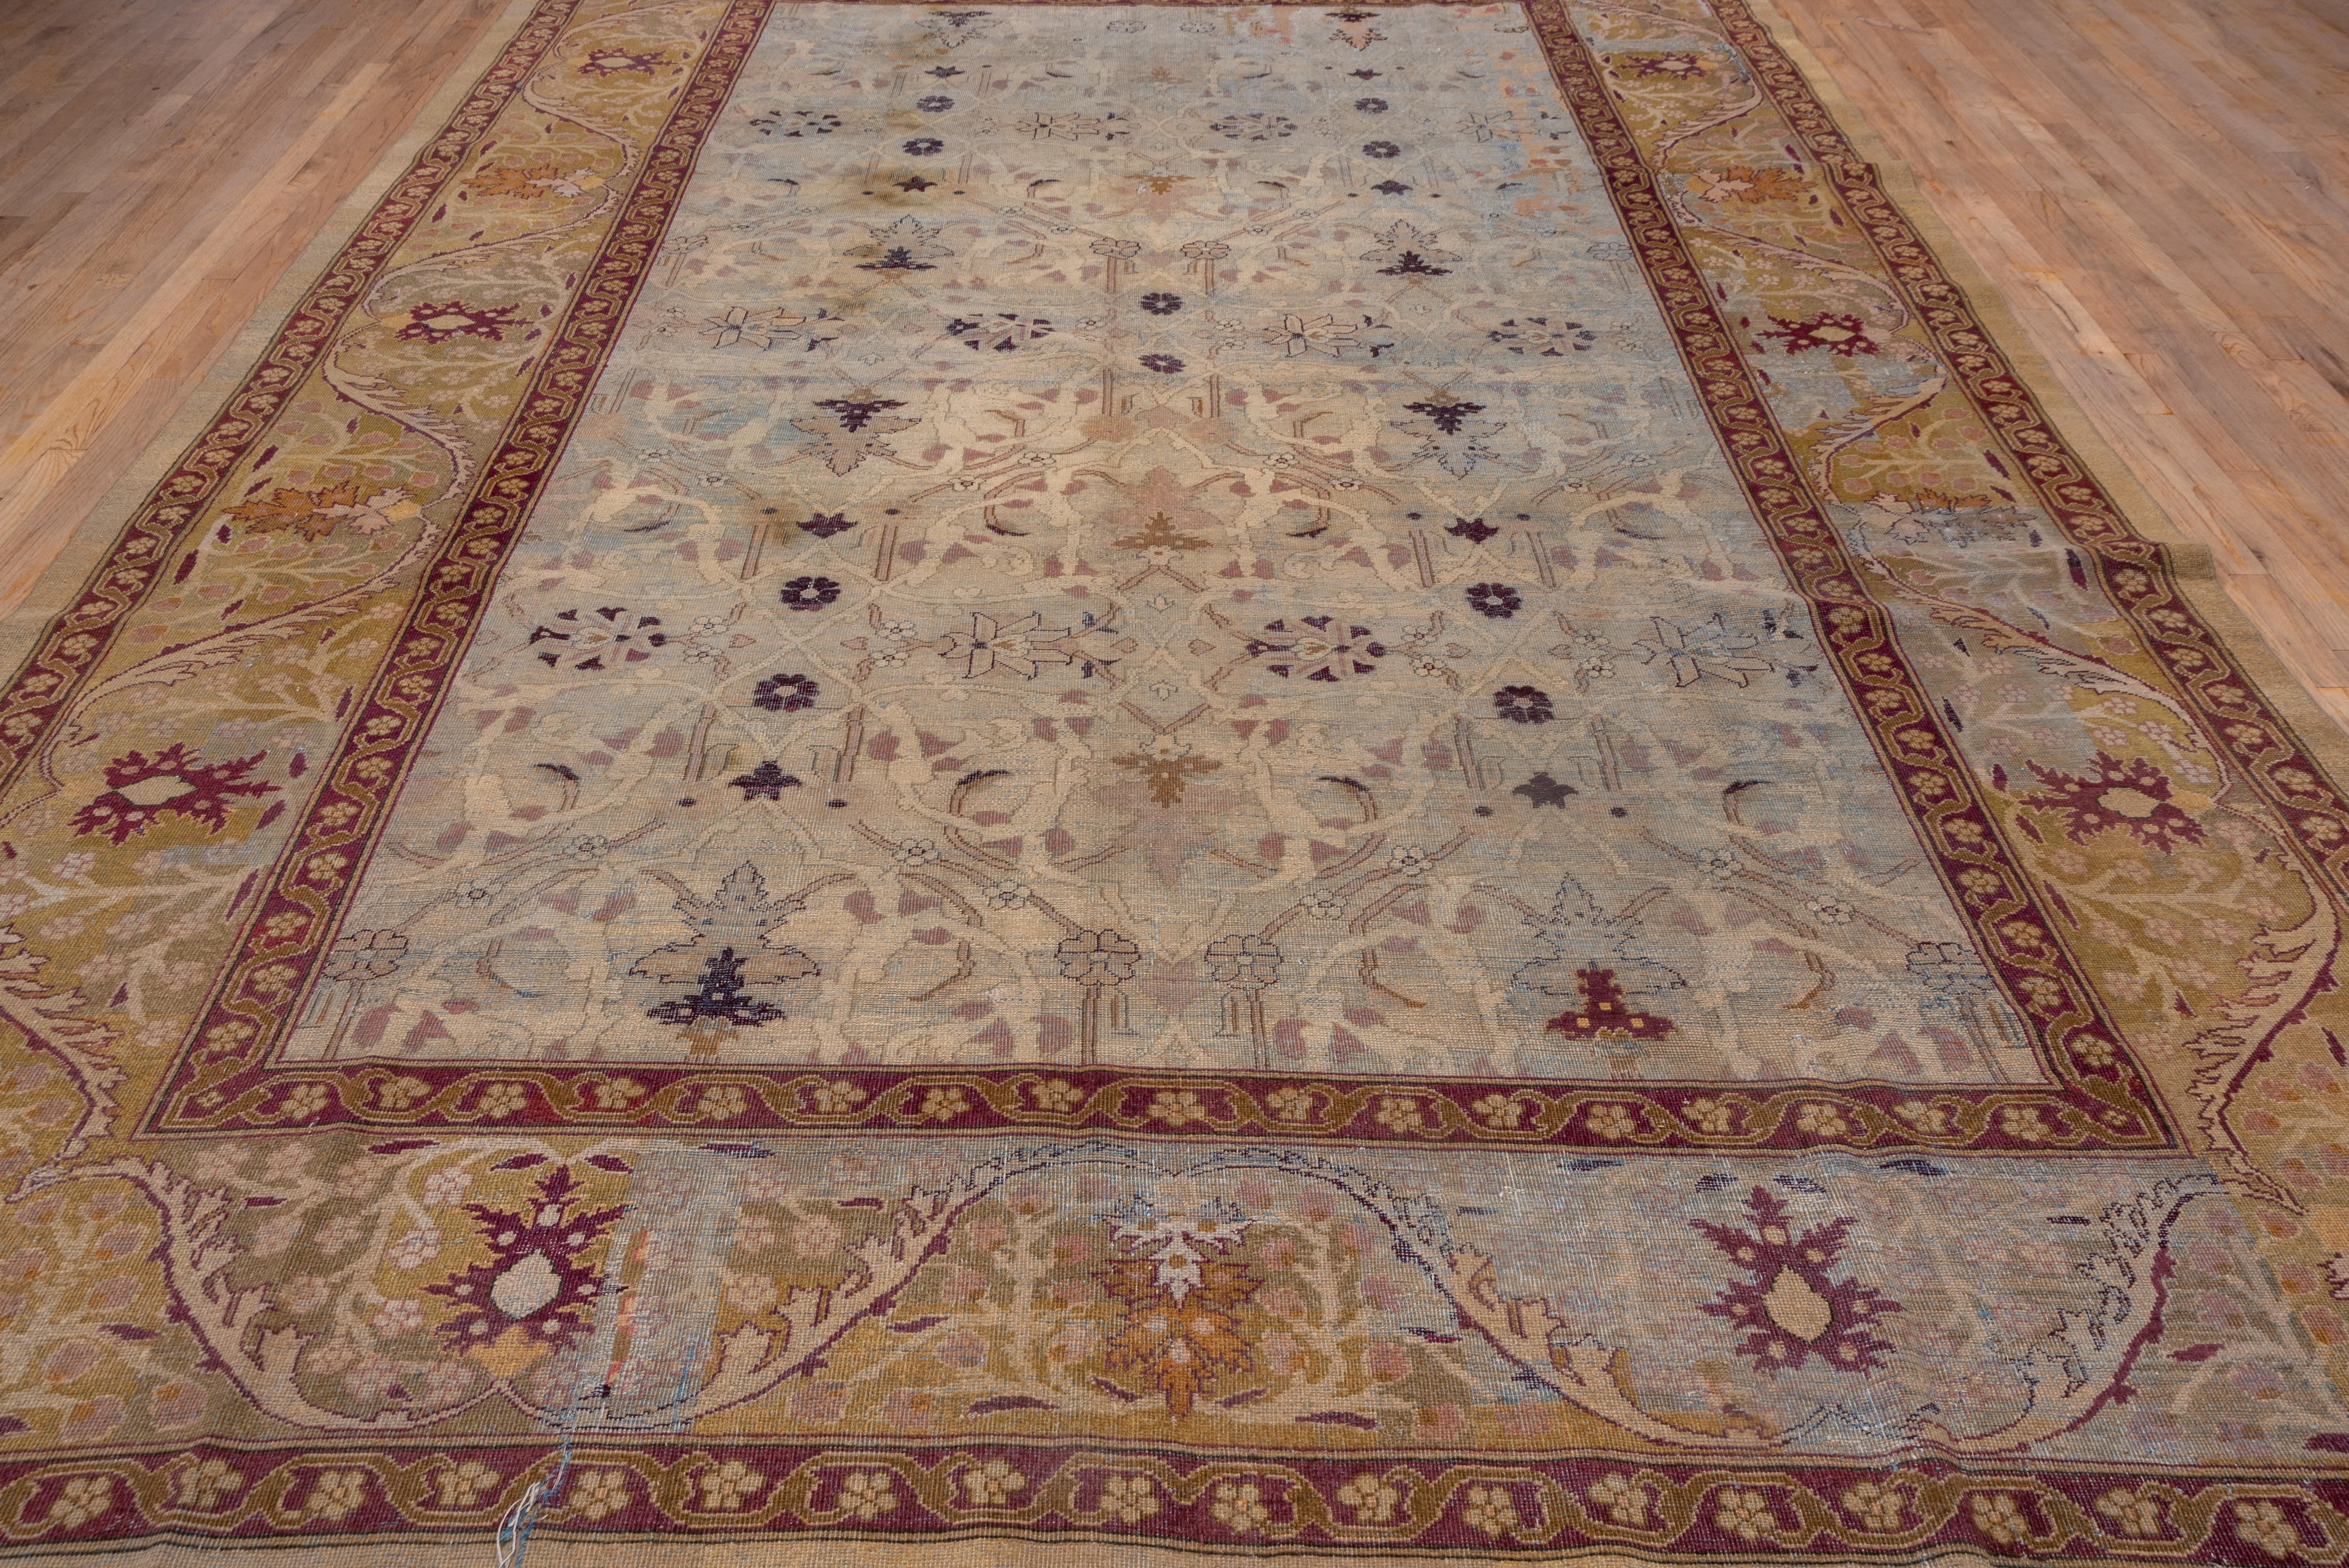 This northern Indian city carpet features a layered petal and rounded palmette arabesque pattern on a powder blue field, with salient dark brown accents. The border juxtaposes mustard and light teal sections and displays ragged, reversing palmettes